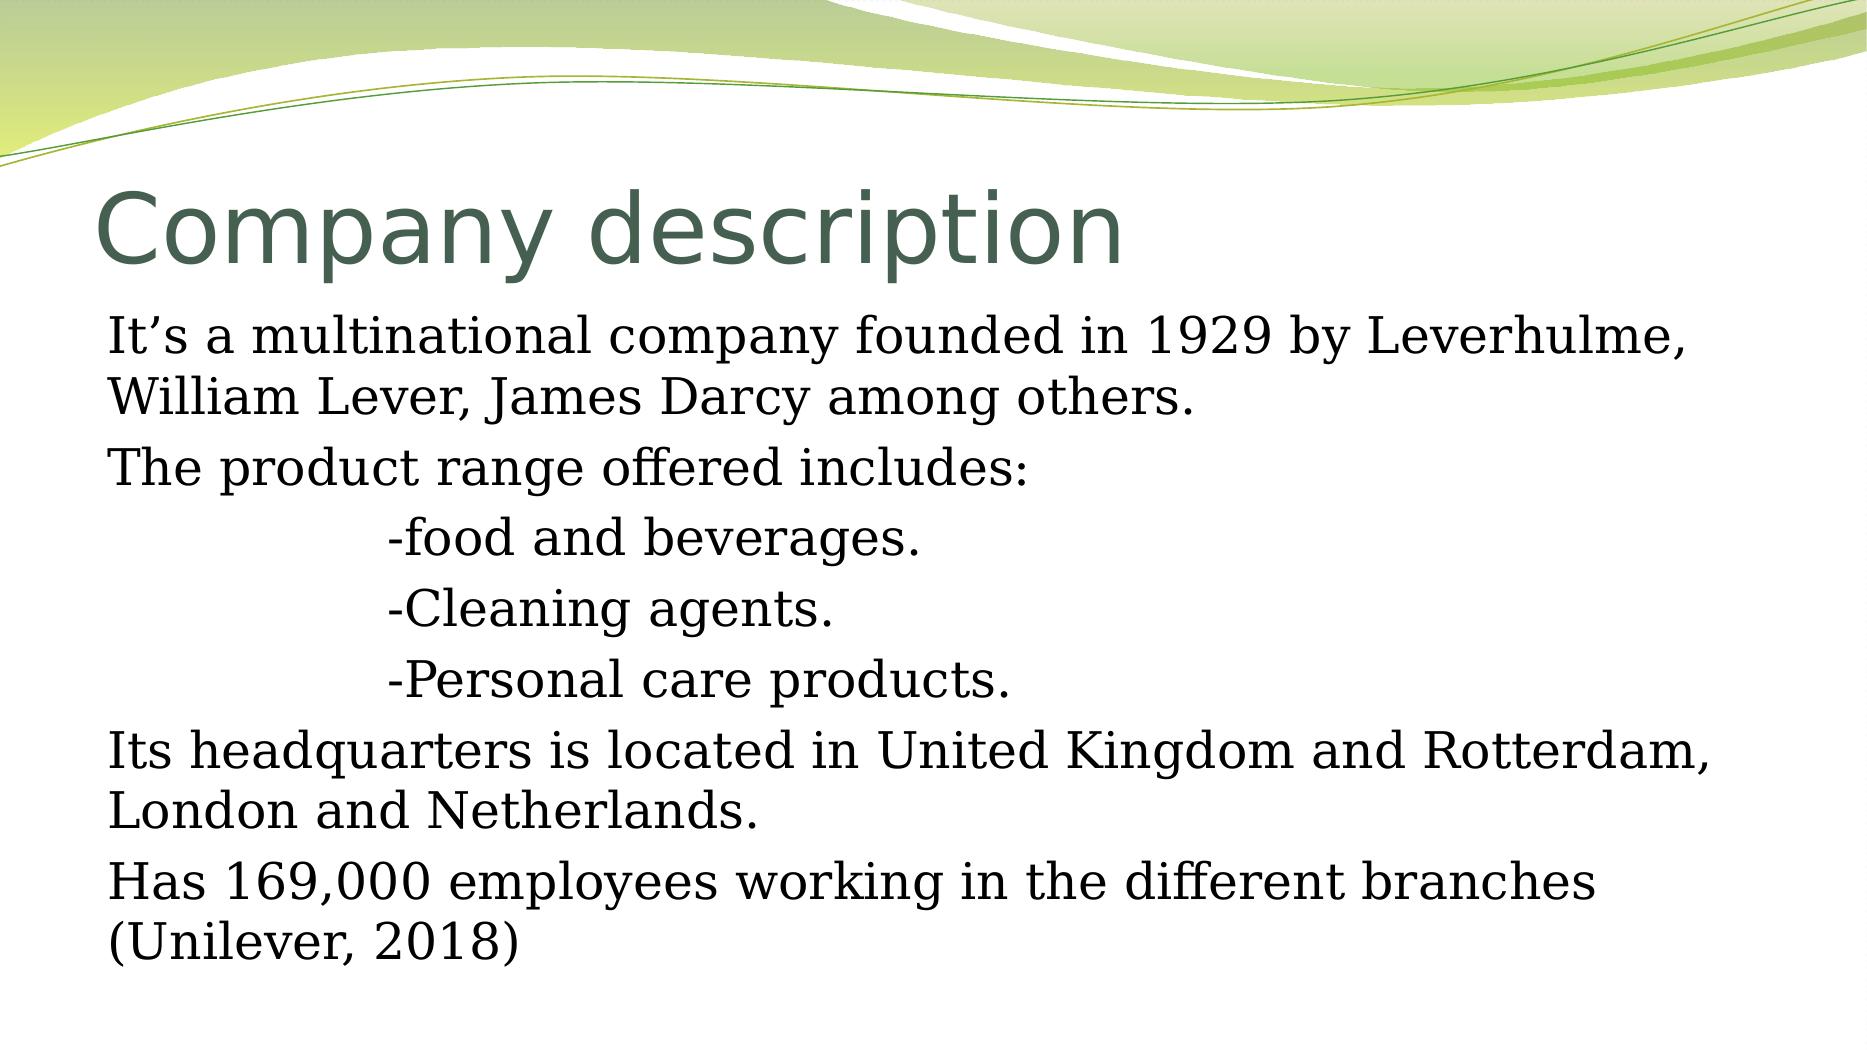 Case study on ethical labor practices in Unilever_2